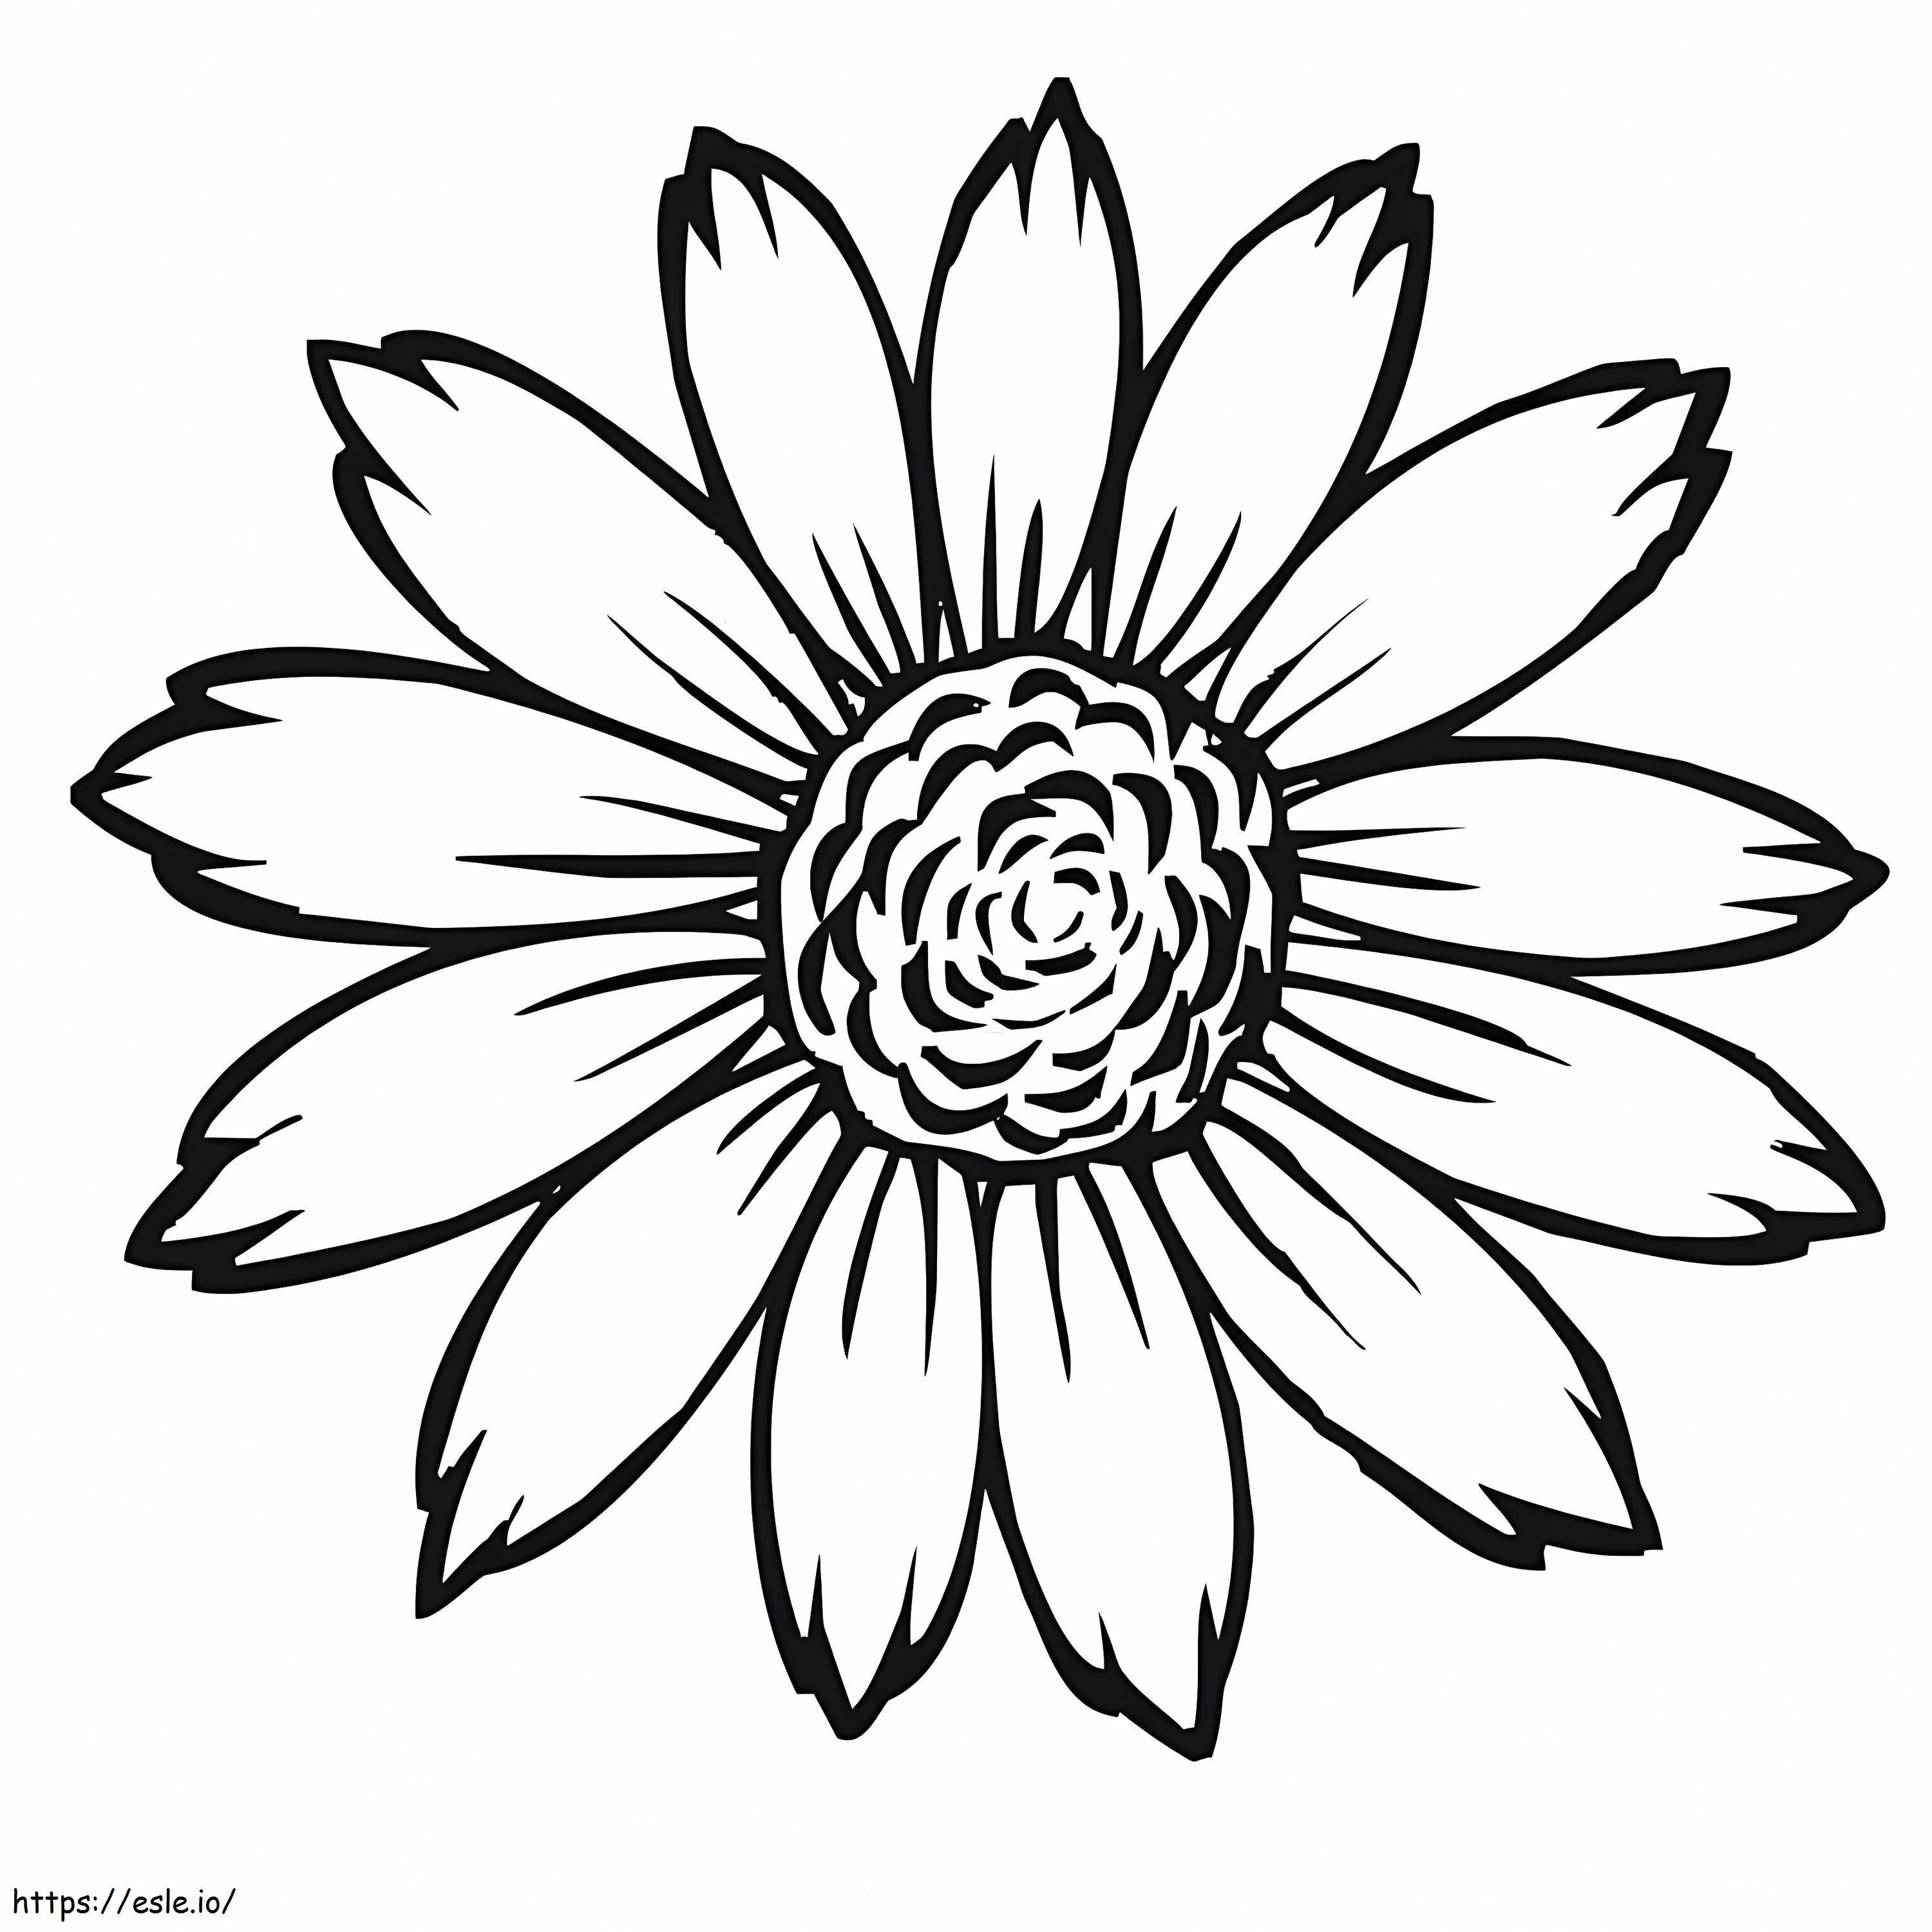 Sunflower Free Printable coloring page